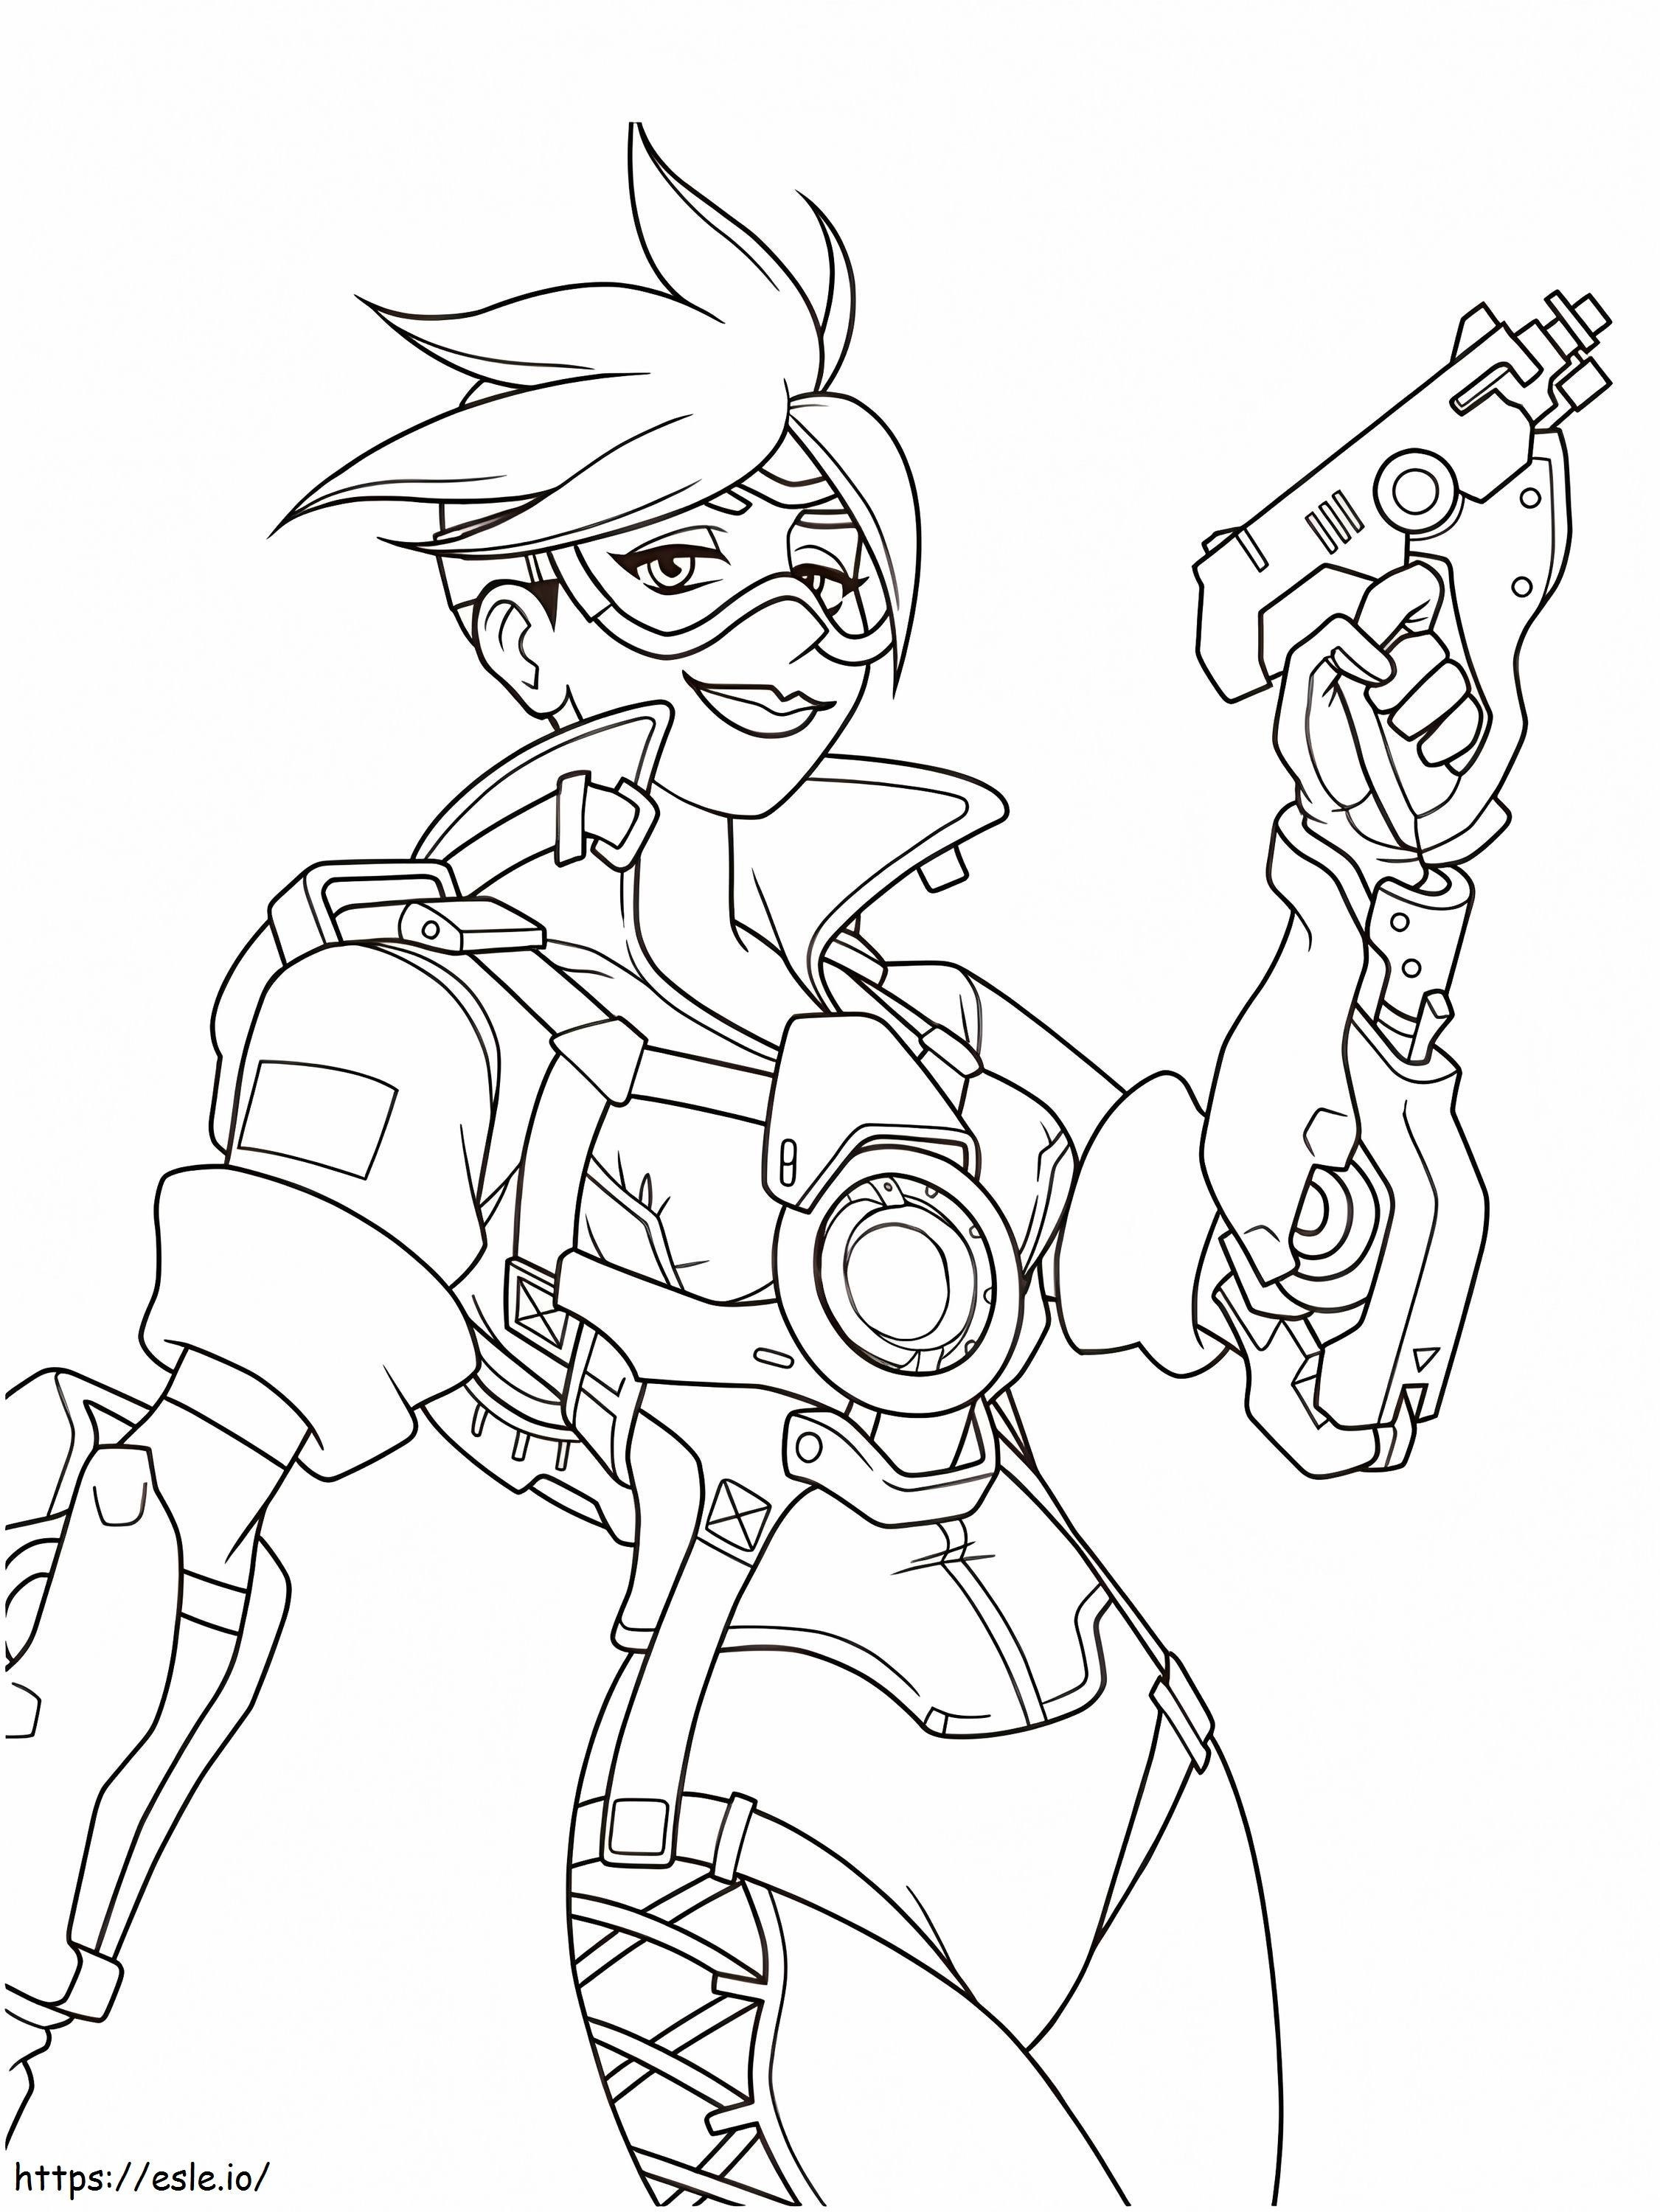 Overwatch 006 coloring page